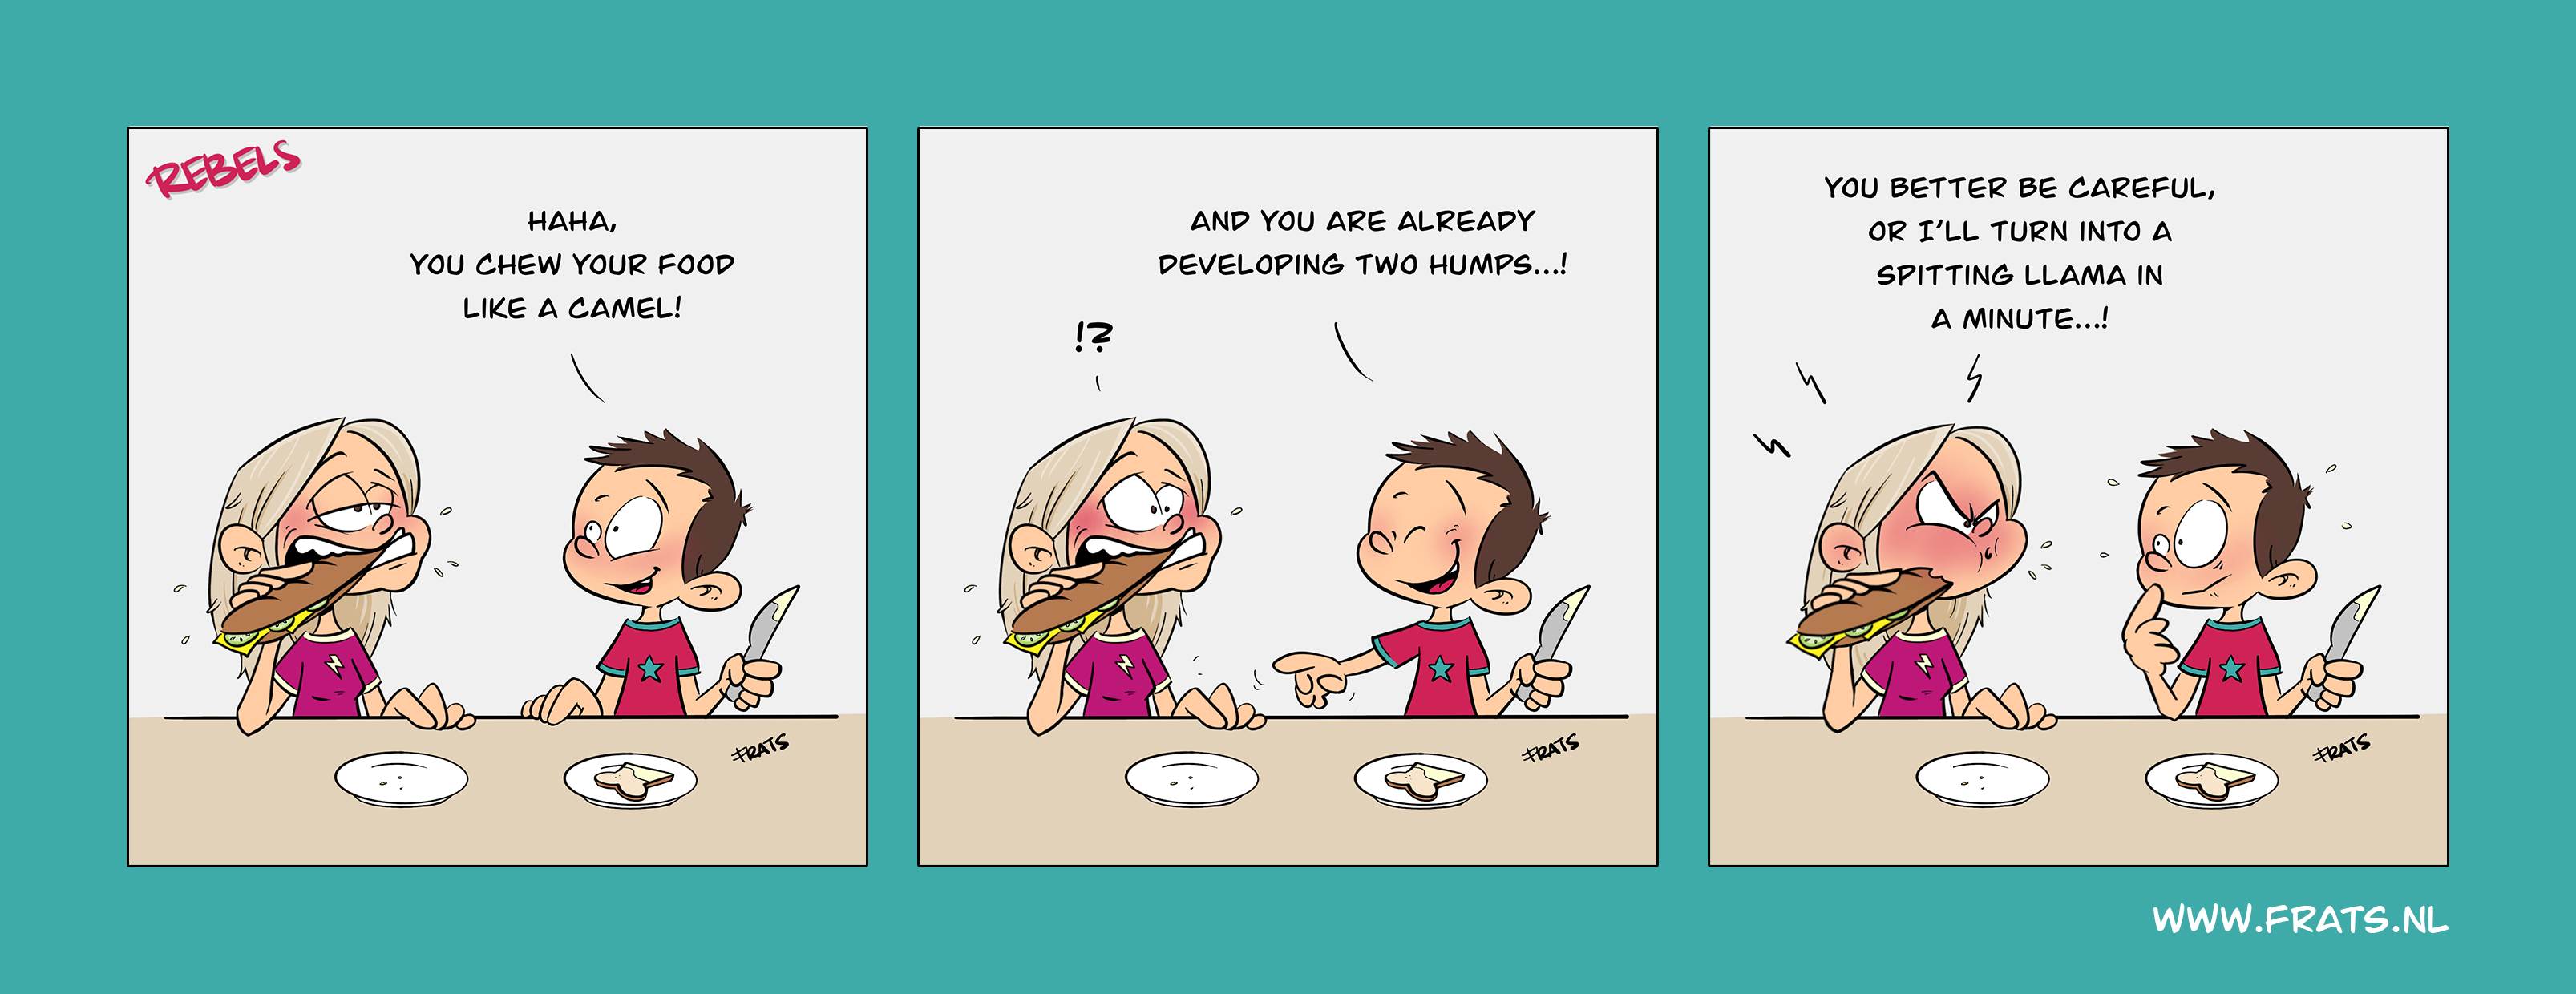 Rebels comic strip about eating a sandwich